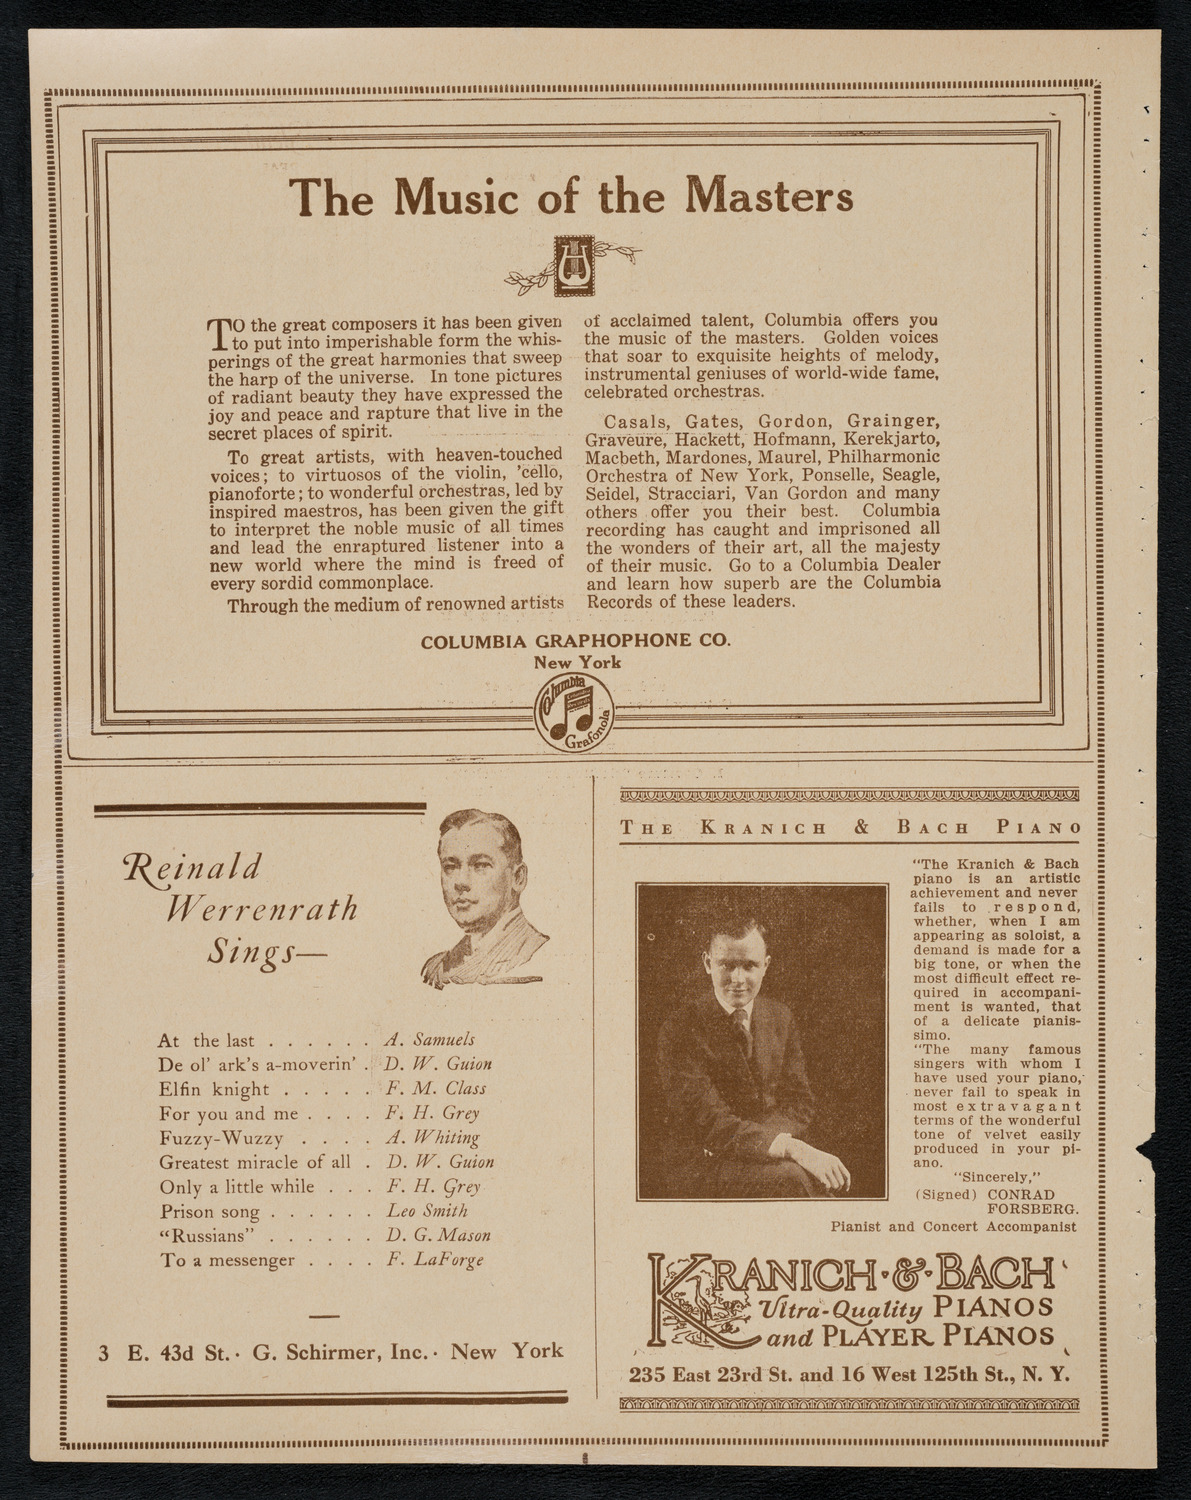 Universal Negro Improvement Association Meeting and Concert, February 23, 1923, program page 6